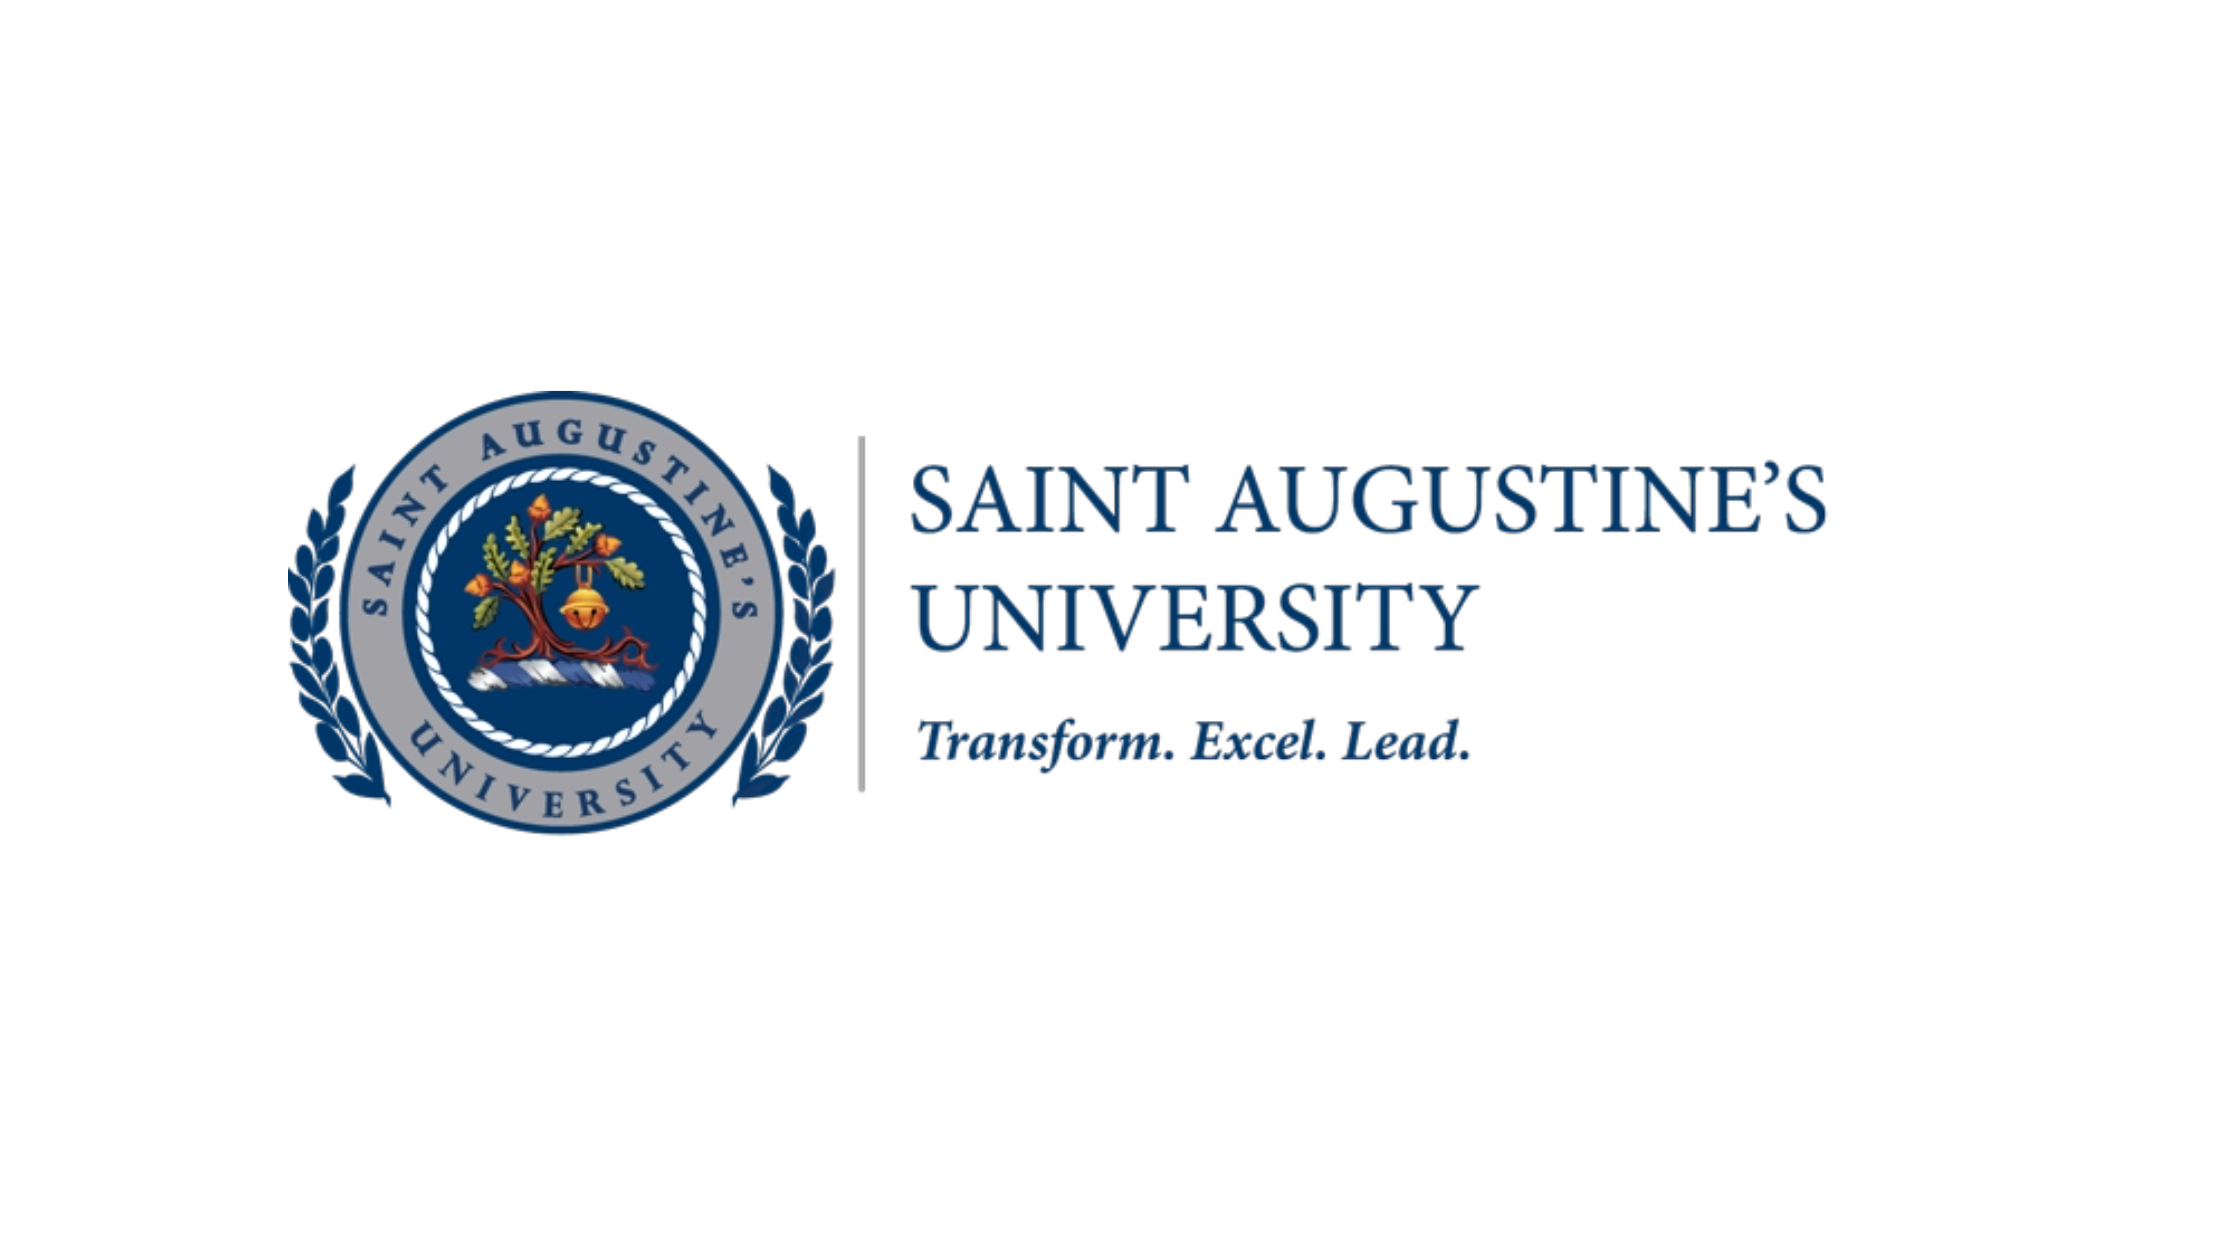 Saint Augustine’s University Announces the Appointment of Dr. Marcus H. Burgess to the role of Interim President